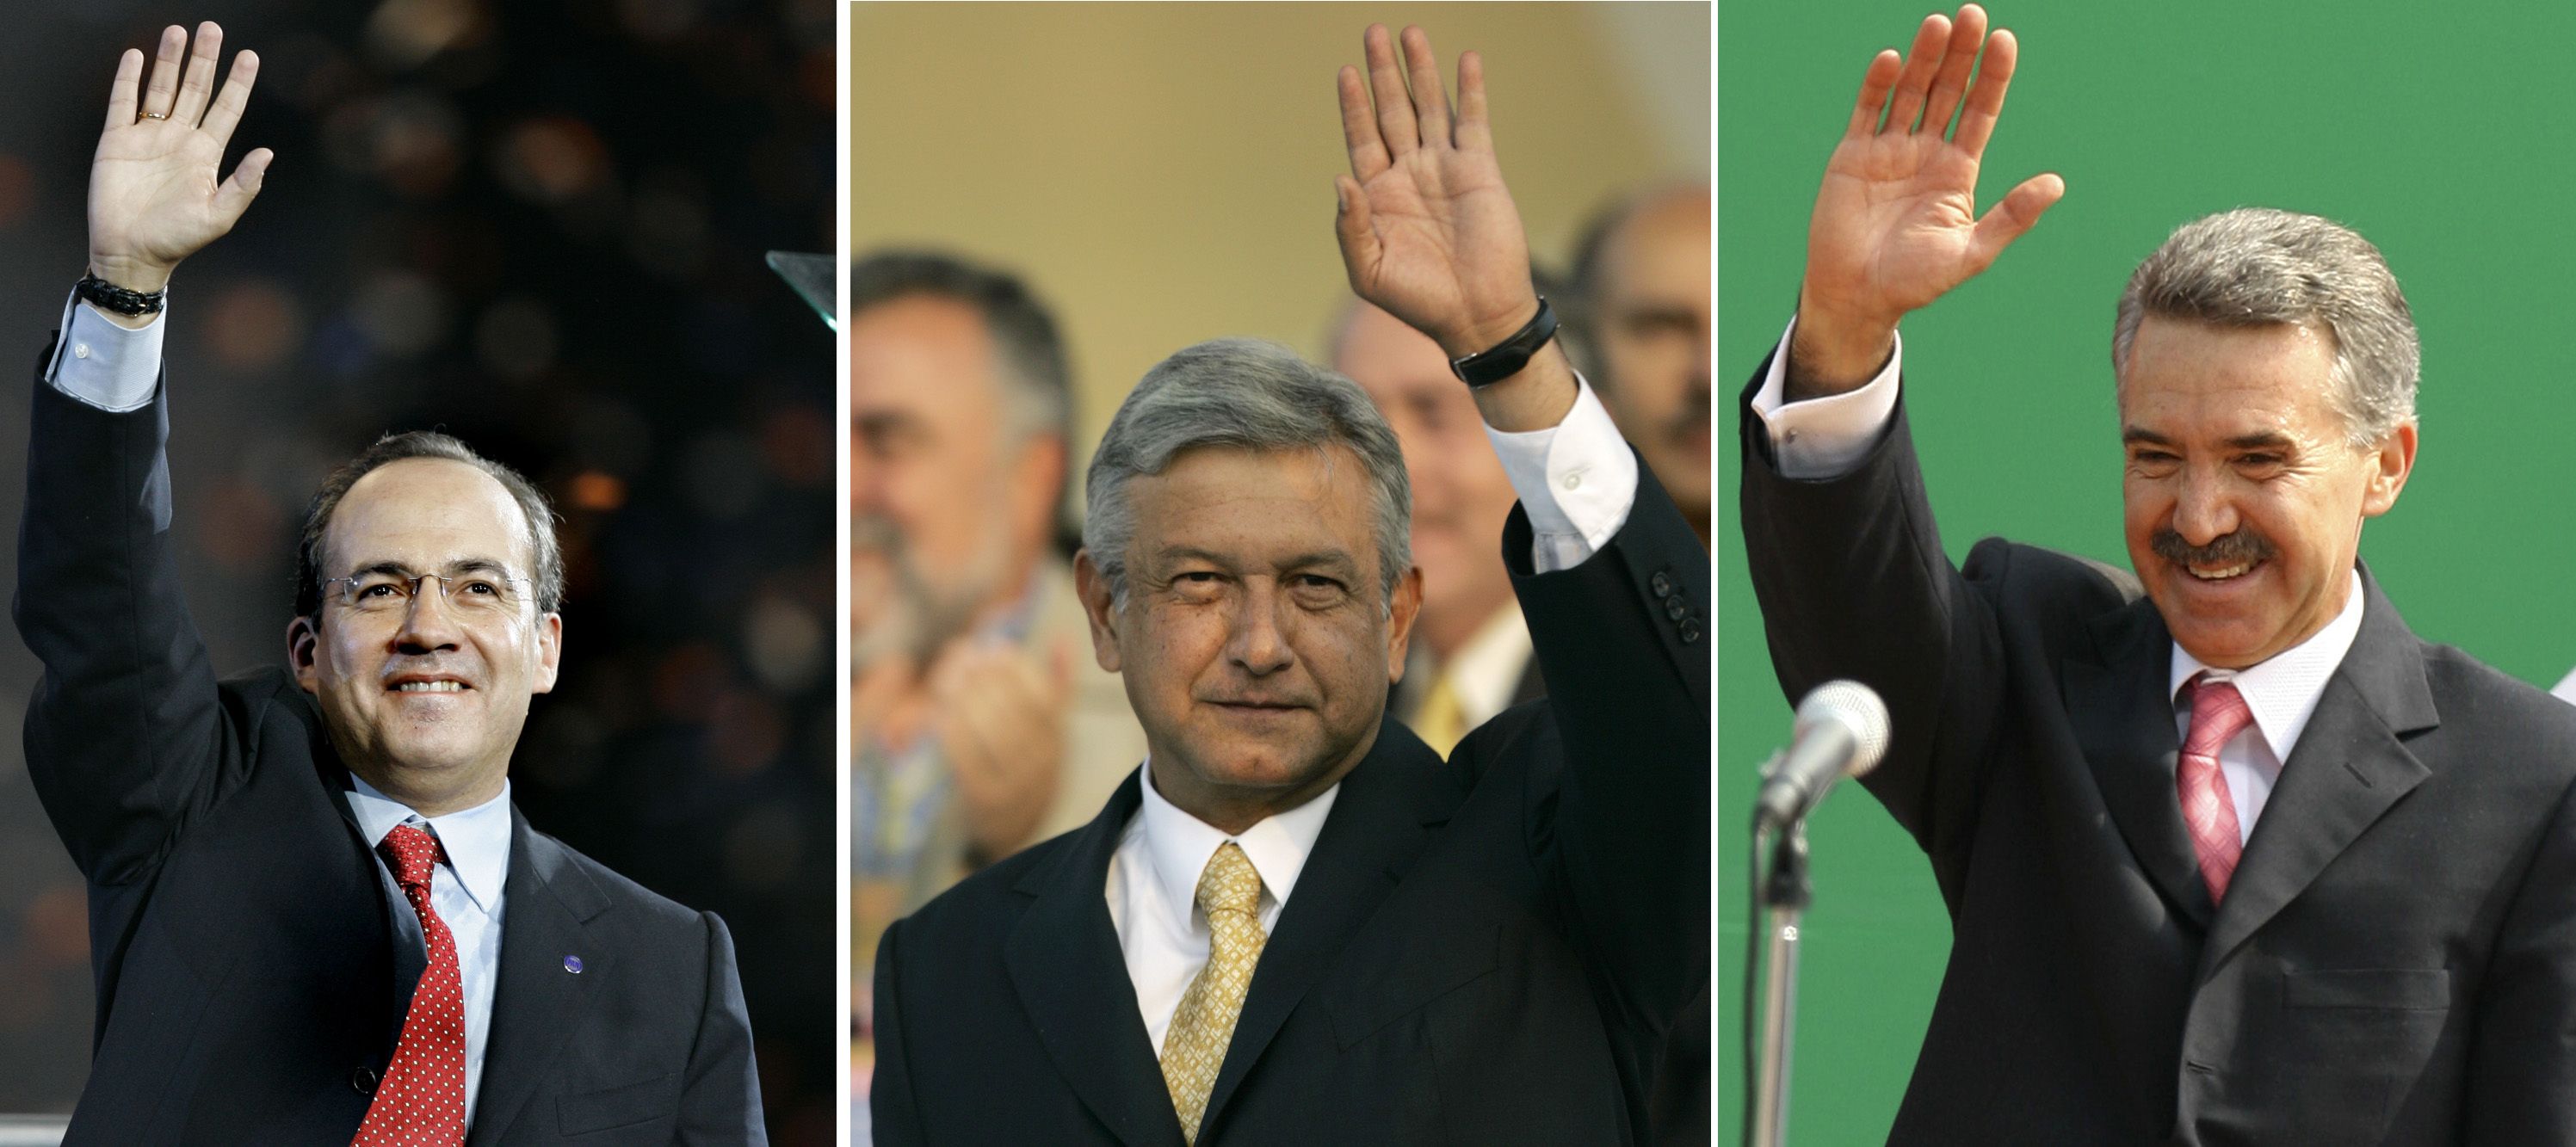 The top three Mexican presidential candidates in the 2006 election, Felipe Calderon, left, Andres Manuel Lopez Obrador, centre, and Roberto Madrazo [File: AP Photos] 